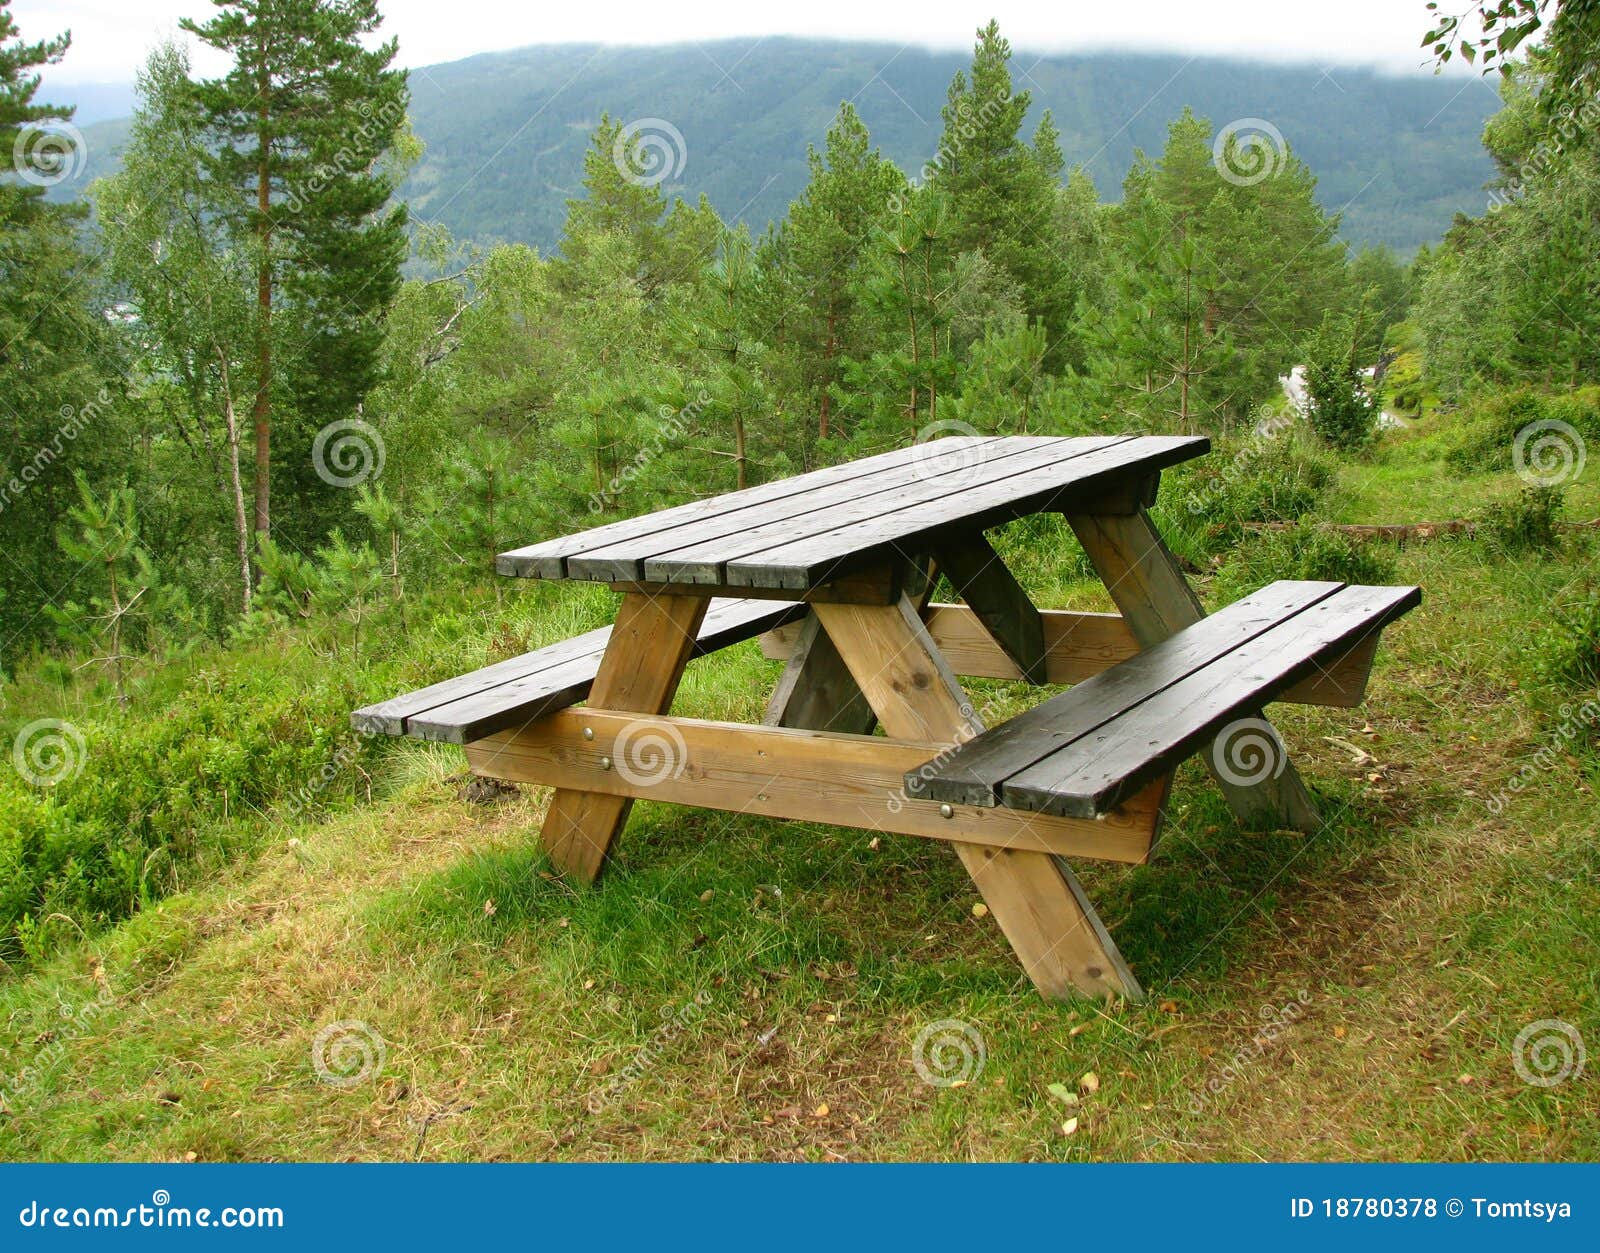 Picnic place stock photo. Image of countryside, nick - 18780378